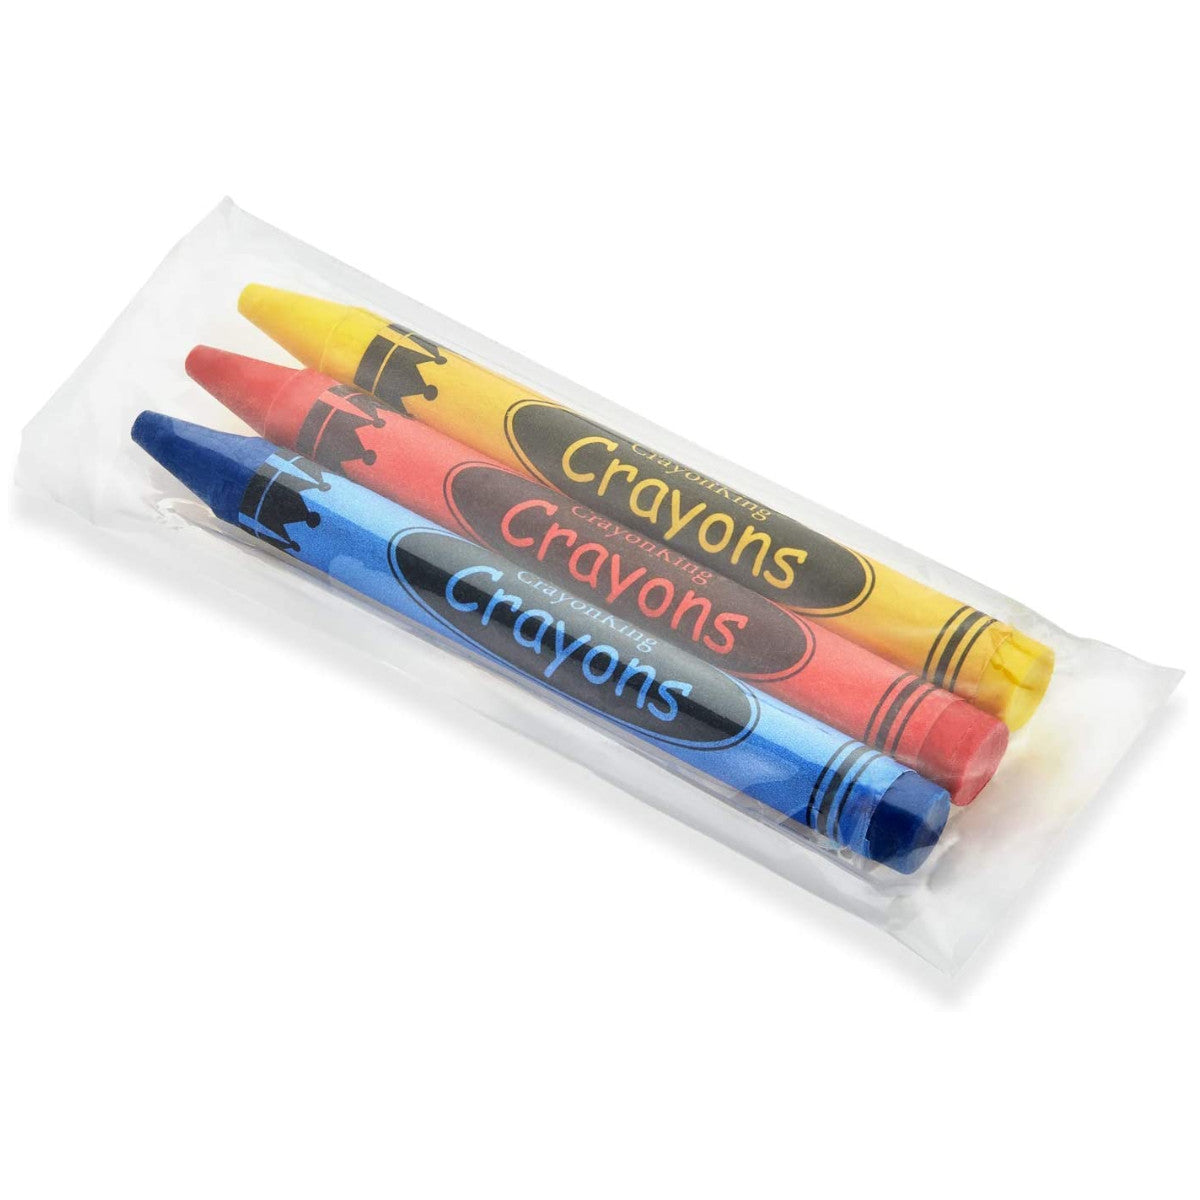 2 Pack Blank Cello Wrapped Crayons